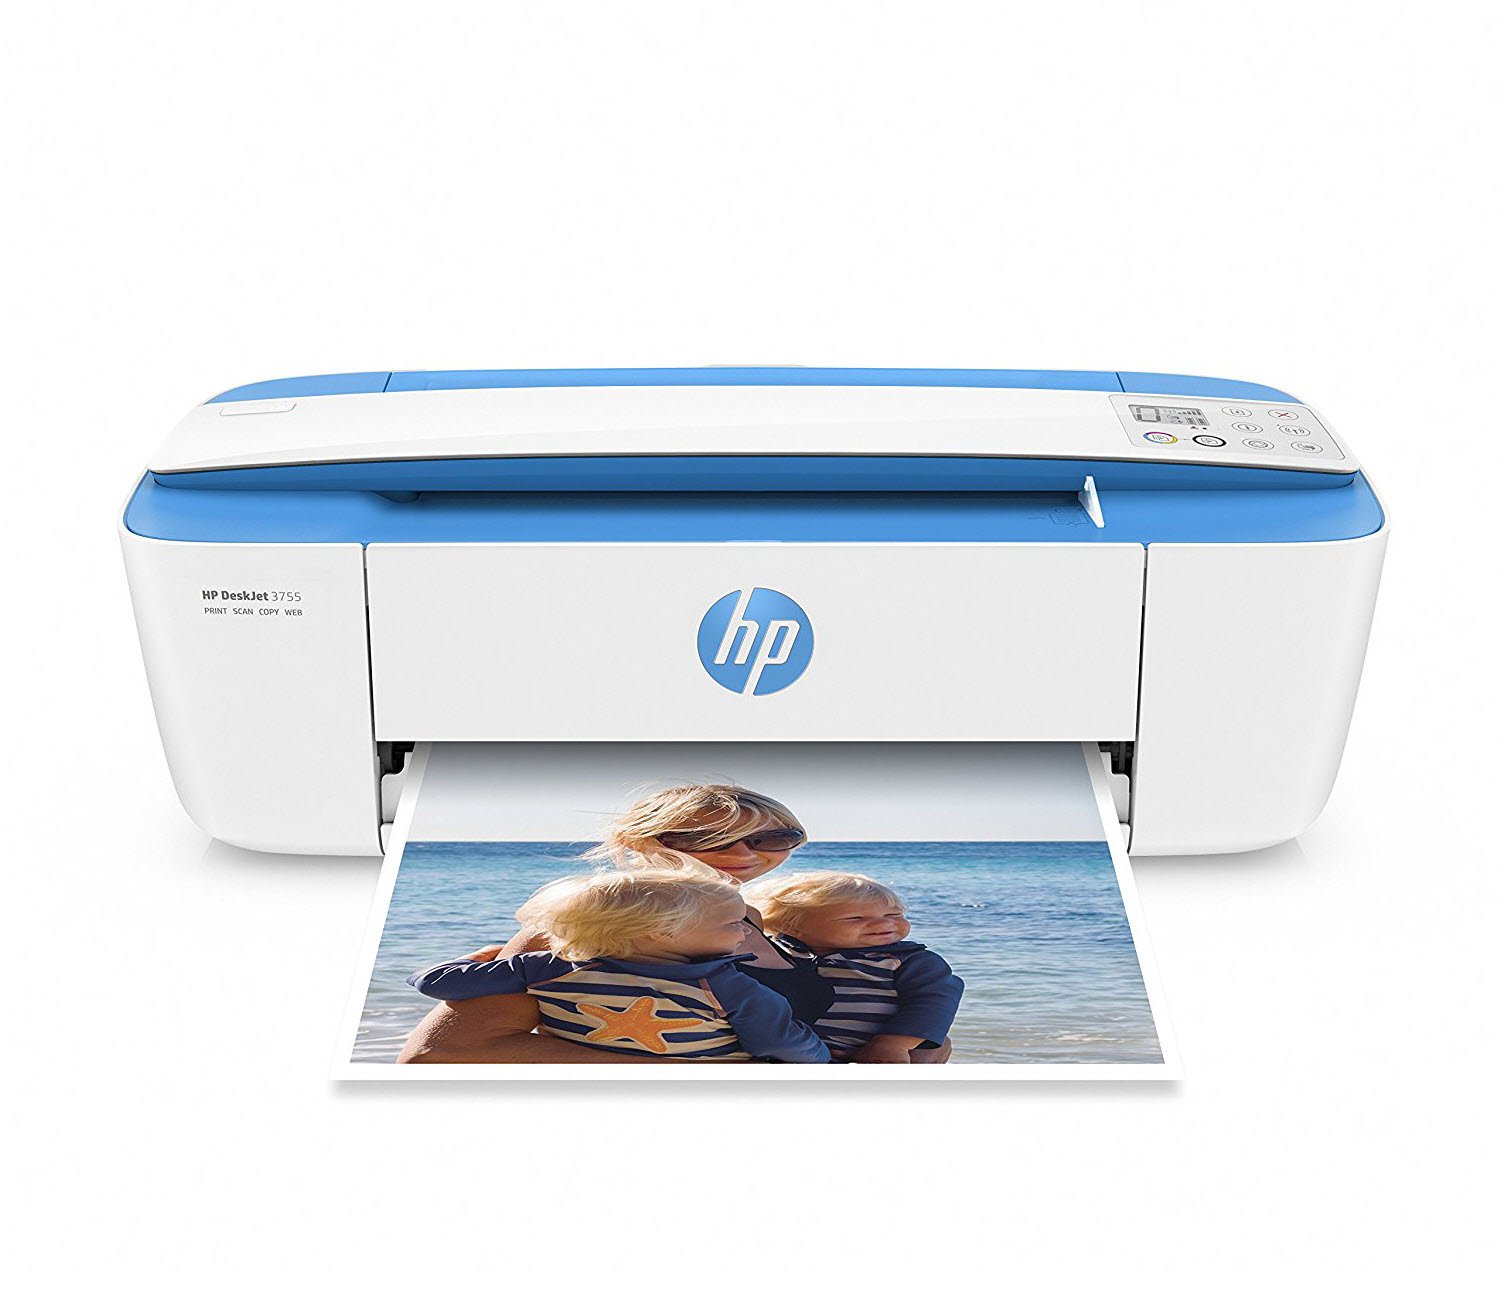 HP DeskJet 3755 Compact All-in-One Wireless Printer - Blue Accent